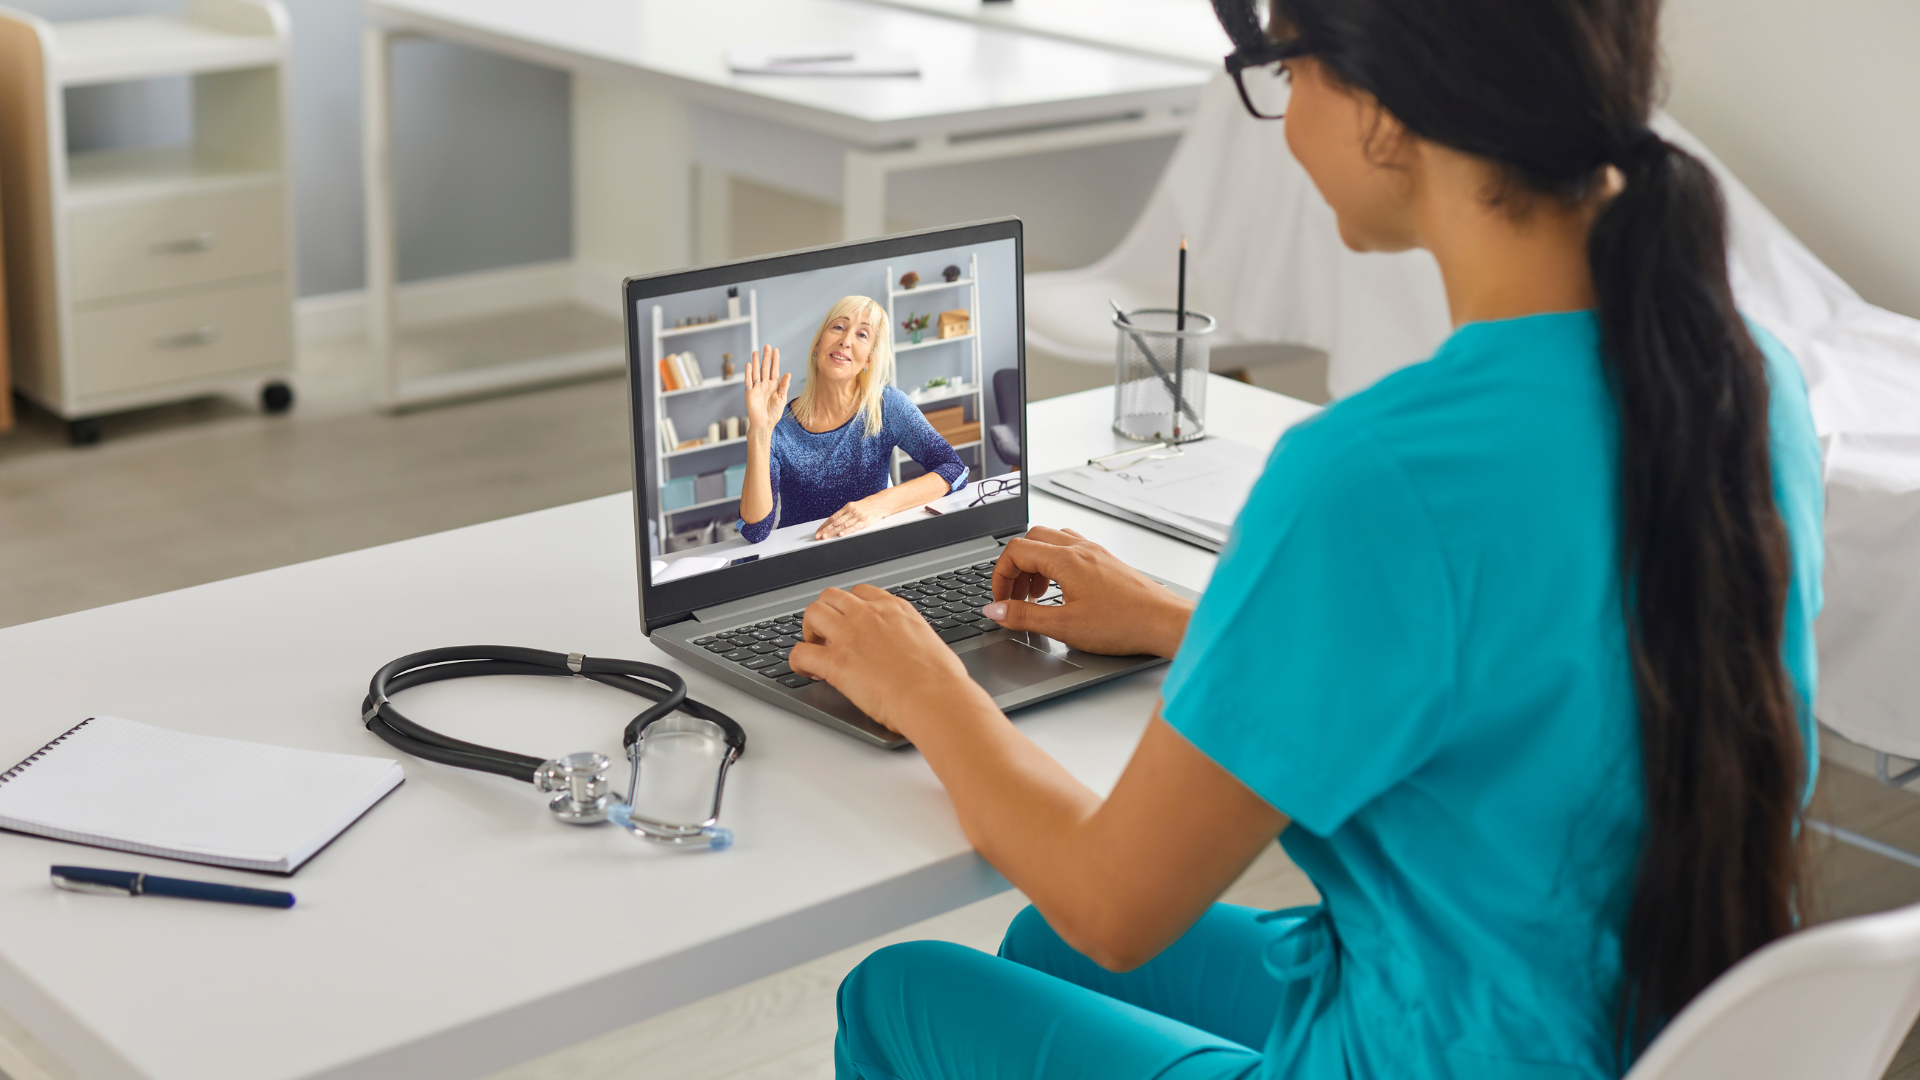 The Benefits of Intensive Telehealth Counseling for Addiction Treatment